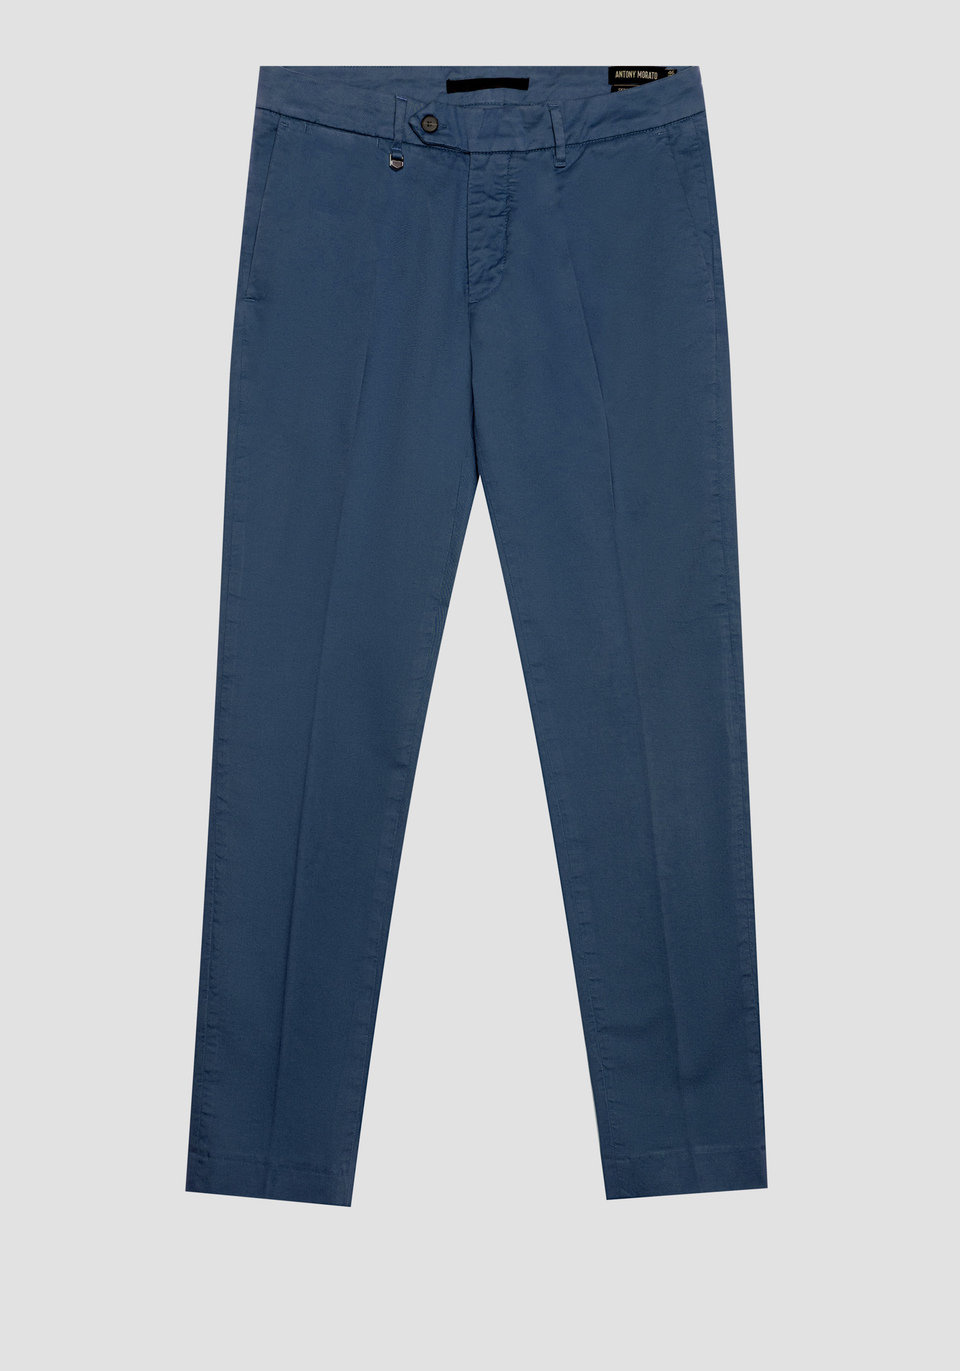 "BRYAN" SKINNY FIT TROUSERS IN SOFT MICRO-WEAVE STRETCH COTTON - Antony Morato Online Shop